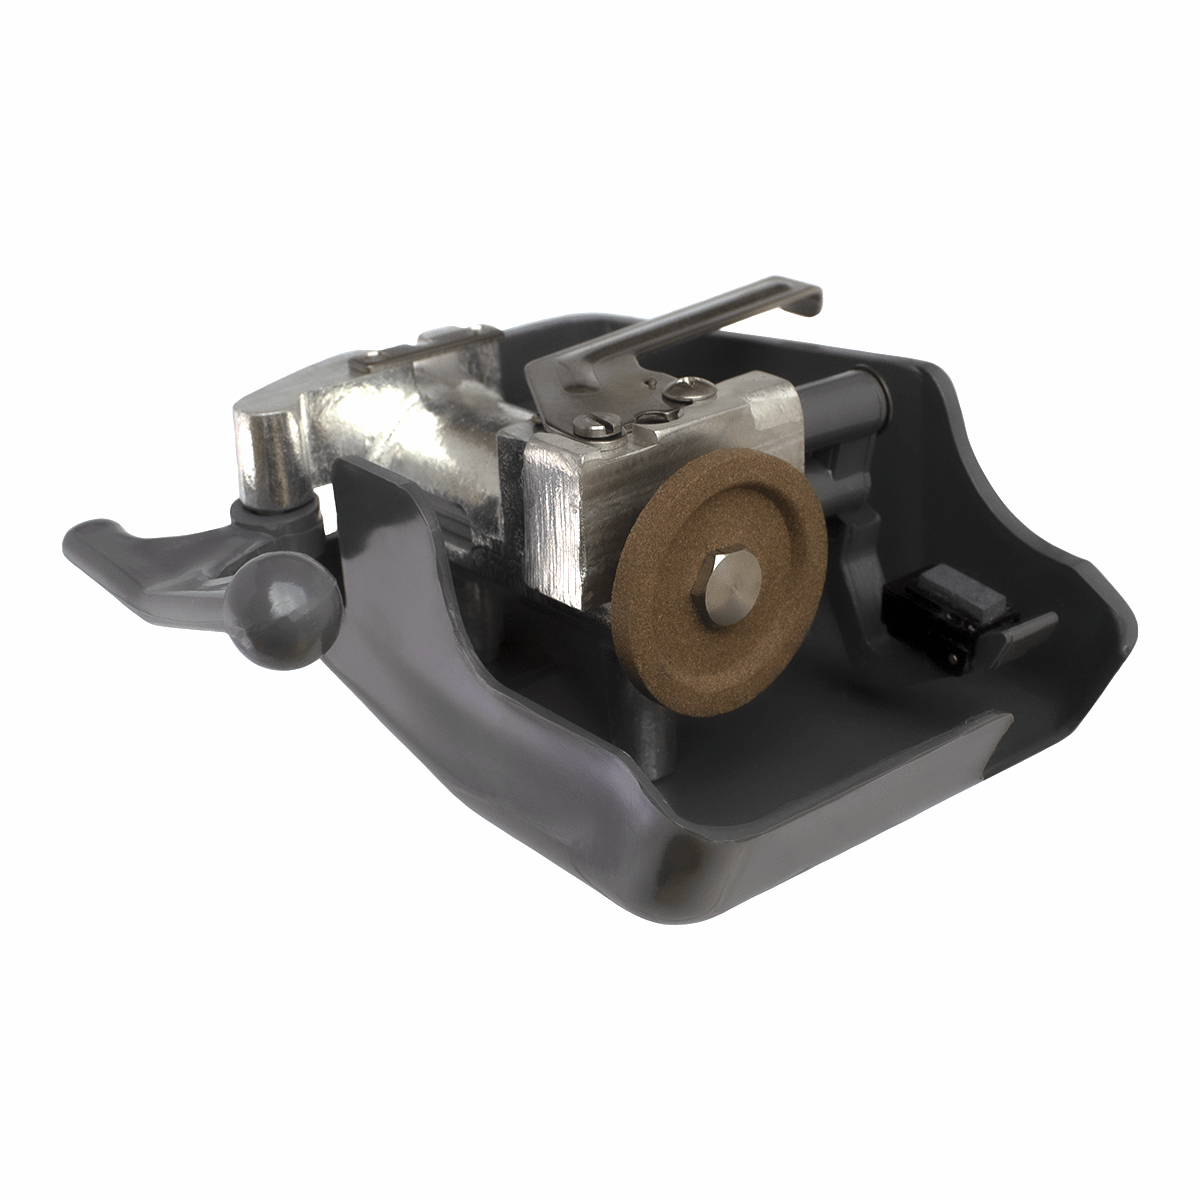 Sharpener assembly complete to fit Hobart Slicers 2612 - 2912, replaces 873847-1  Replaces:  873847-1  fits Brands:  Hobart  Fits Models:  2612  2712  2812  2912  ***Please make sure your current sharpener has the small activating lever on the sharpener itself. inside view